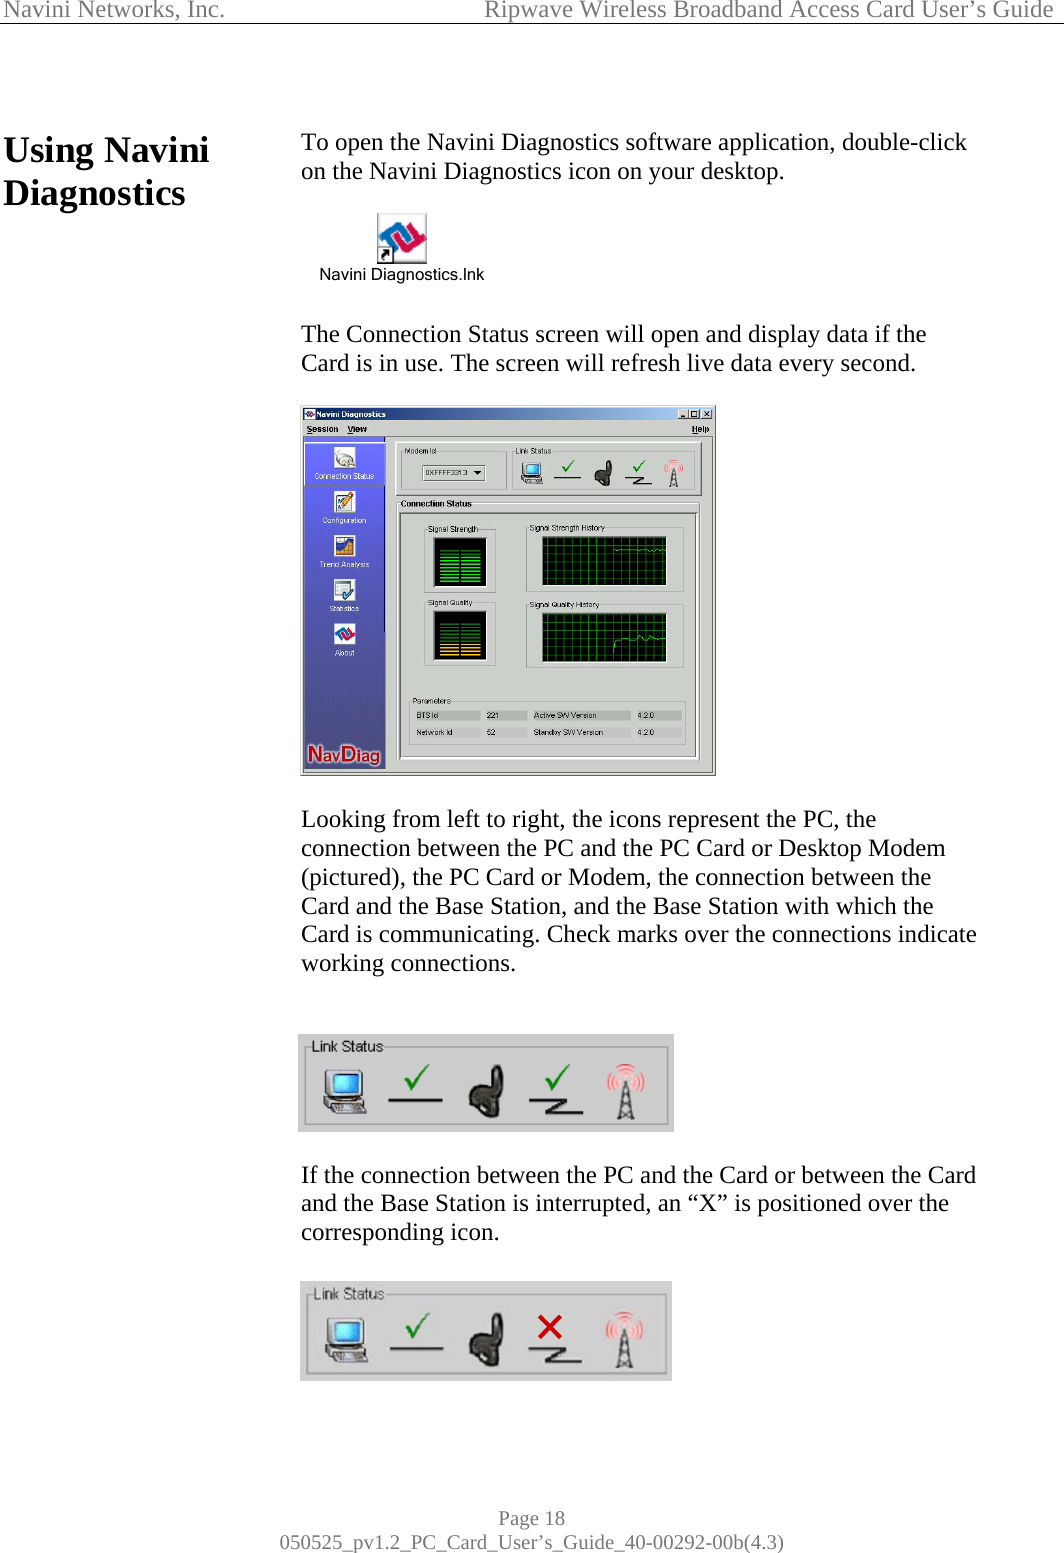 Navini Networks, Inc.            Ripwave Wireless Broadband Access Card User’s Guide Page 18 050525_pv1.2_PC_Card_User’s_Guide_40-00292-00b(4.3)  Using Navini Diagnostics                                             To open the Navini Diagnostics software application, double-click on the Navini Diagnostics icon on your desktop.   Navini Diagnostics.lnk   The Connection Status screen will open and display data if the Card is in use. The screen will refresh live data every second.     Looking from left to right, the icons represent the PC, the connection between the PC and the PC Card or Desktop Modem (pictured), the PC Card or Modem, the connection between the Card and the Base Station, and the Base Station with which the Card is communicating. Check marks over the connections indicate working connections.    If the connection between the PC and the Card or between the Card and the Base Station is interrupted, an “X” is positioned over the corresponding icon.   